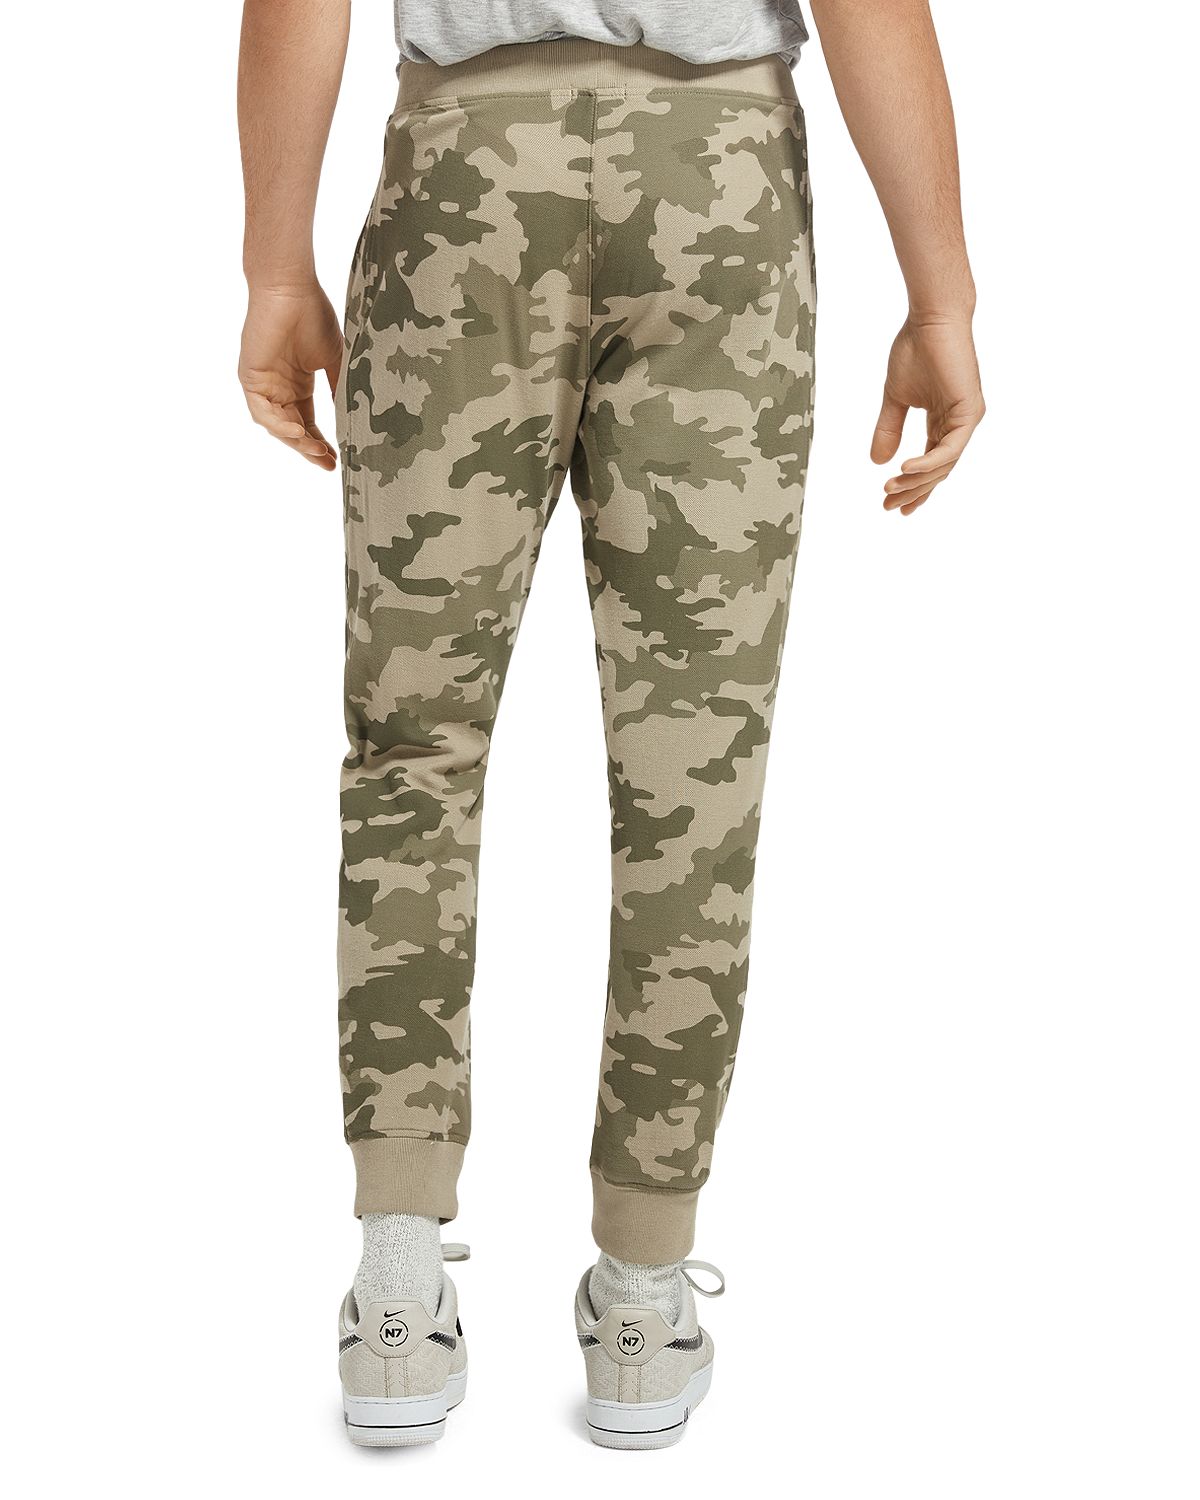 AVISHITI Dry-Fit Stretchable Camouflage Men Military Lower 6 Pocket  Trackpant Jogger Sports Gym Pant Green M : Amazon.in: Clothing & Accessories